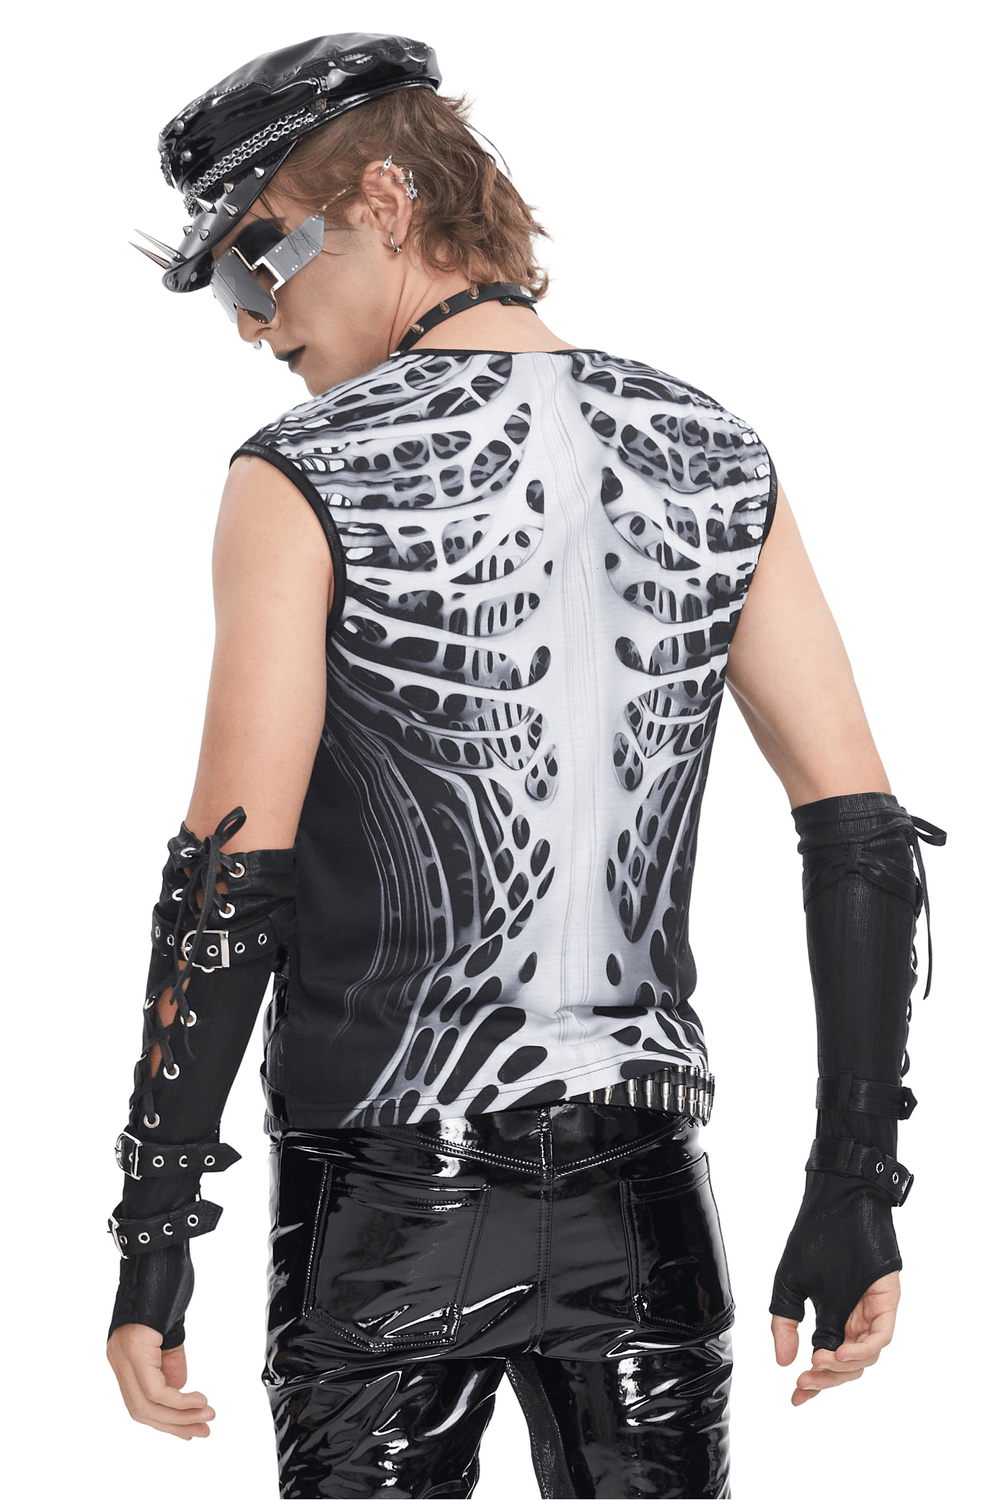 Gothic Male Tank Top with Skeleton Graphic and Rivets